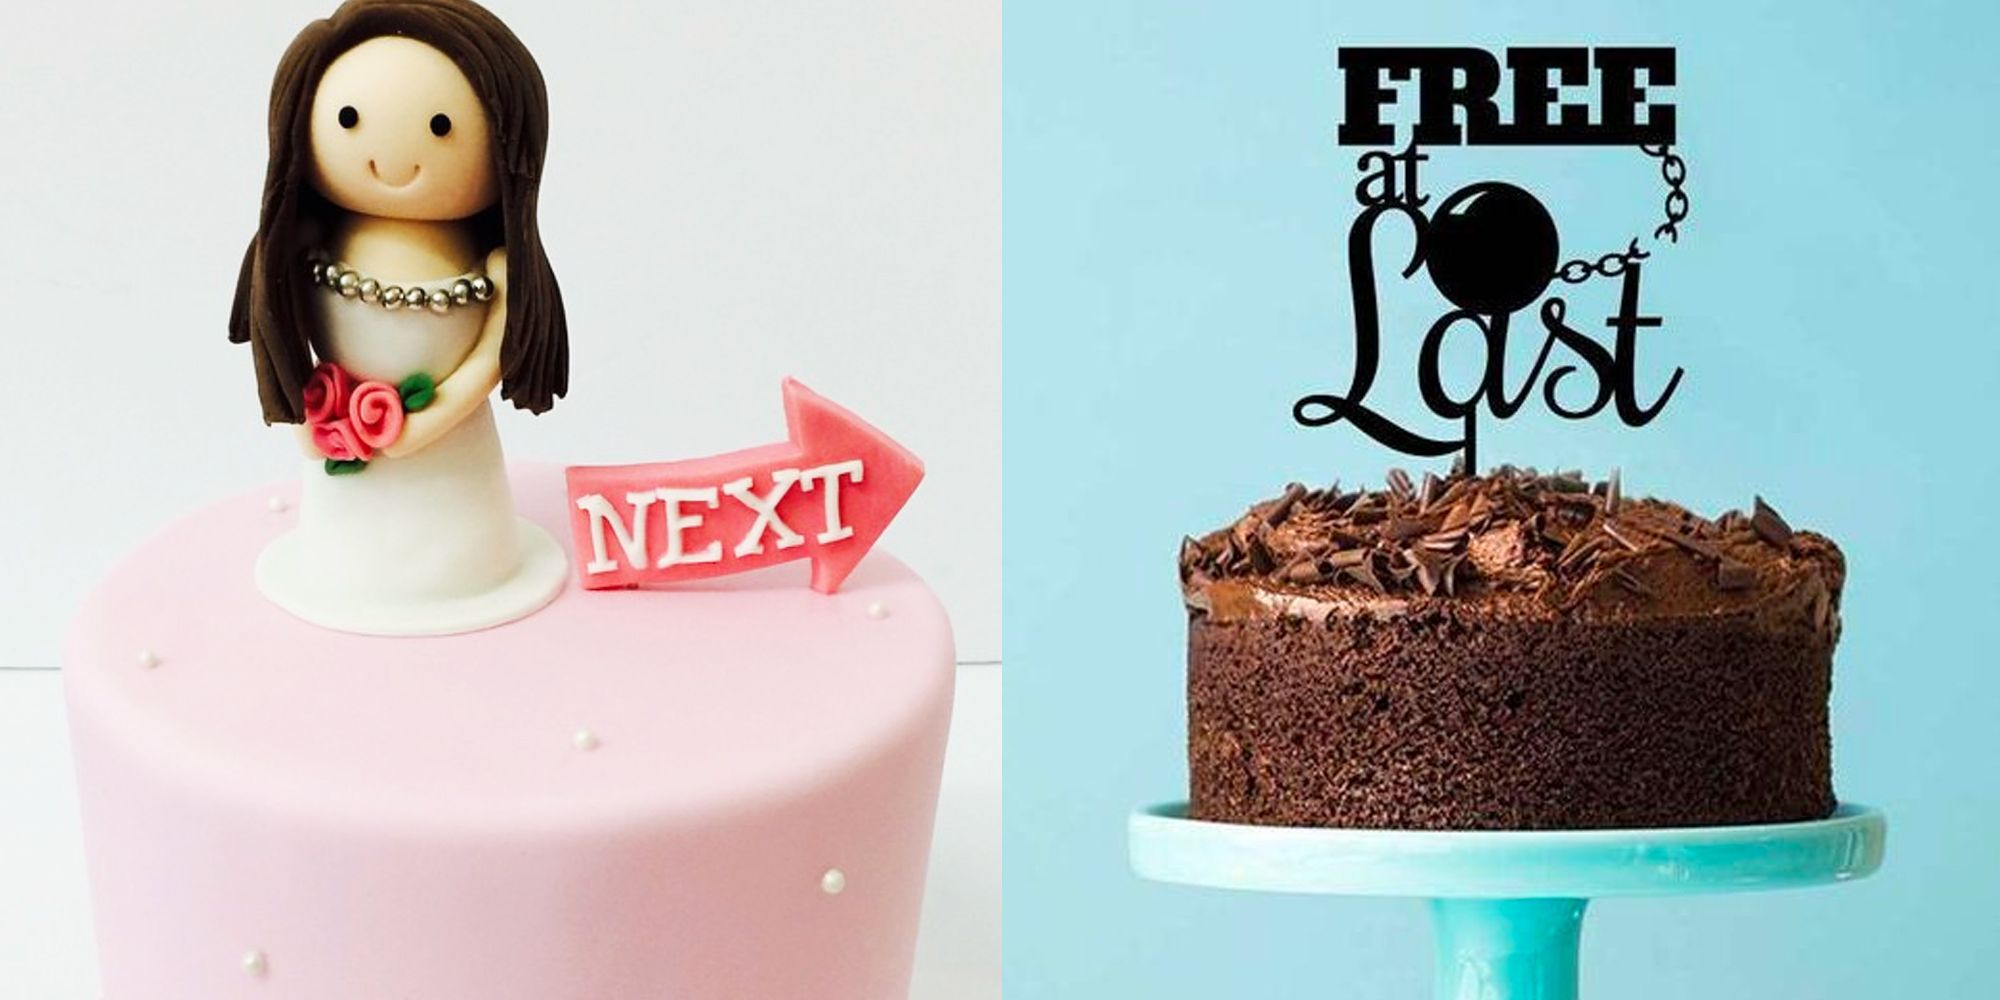 20 Funny Wedding Cake Toppers for 2022 - hitched.co.uk - hitched.co.uk